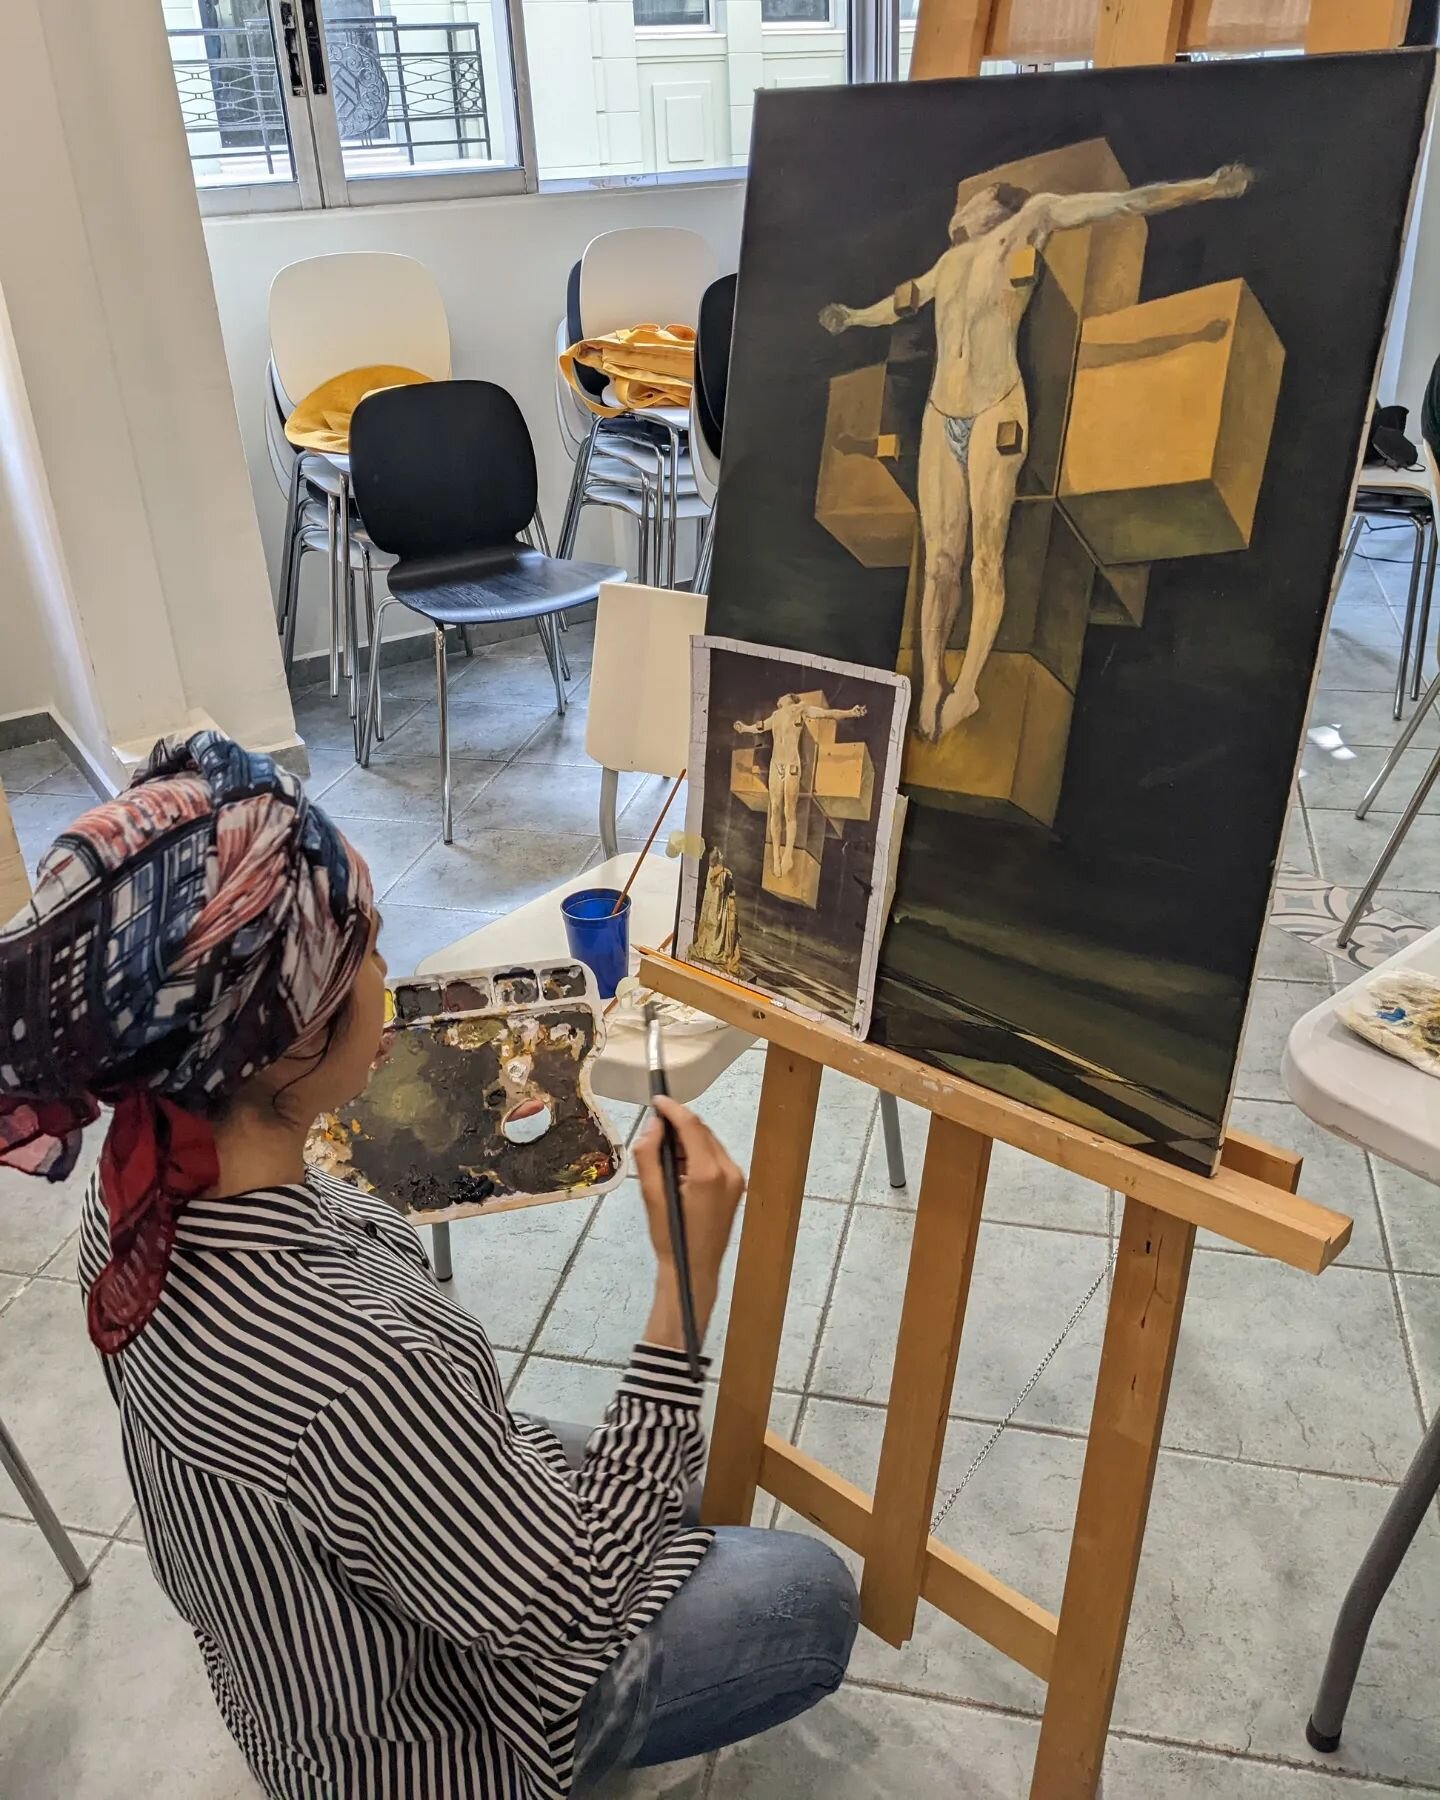 Today we say goodbye to Omolbanin, as she tries to finish up her painting study before she moves on to Germany. We will miss our amazing friend. 💙🥲 May you and Farzane and Setareh find a place to call home and a place to keep learning and sharing b